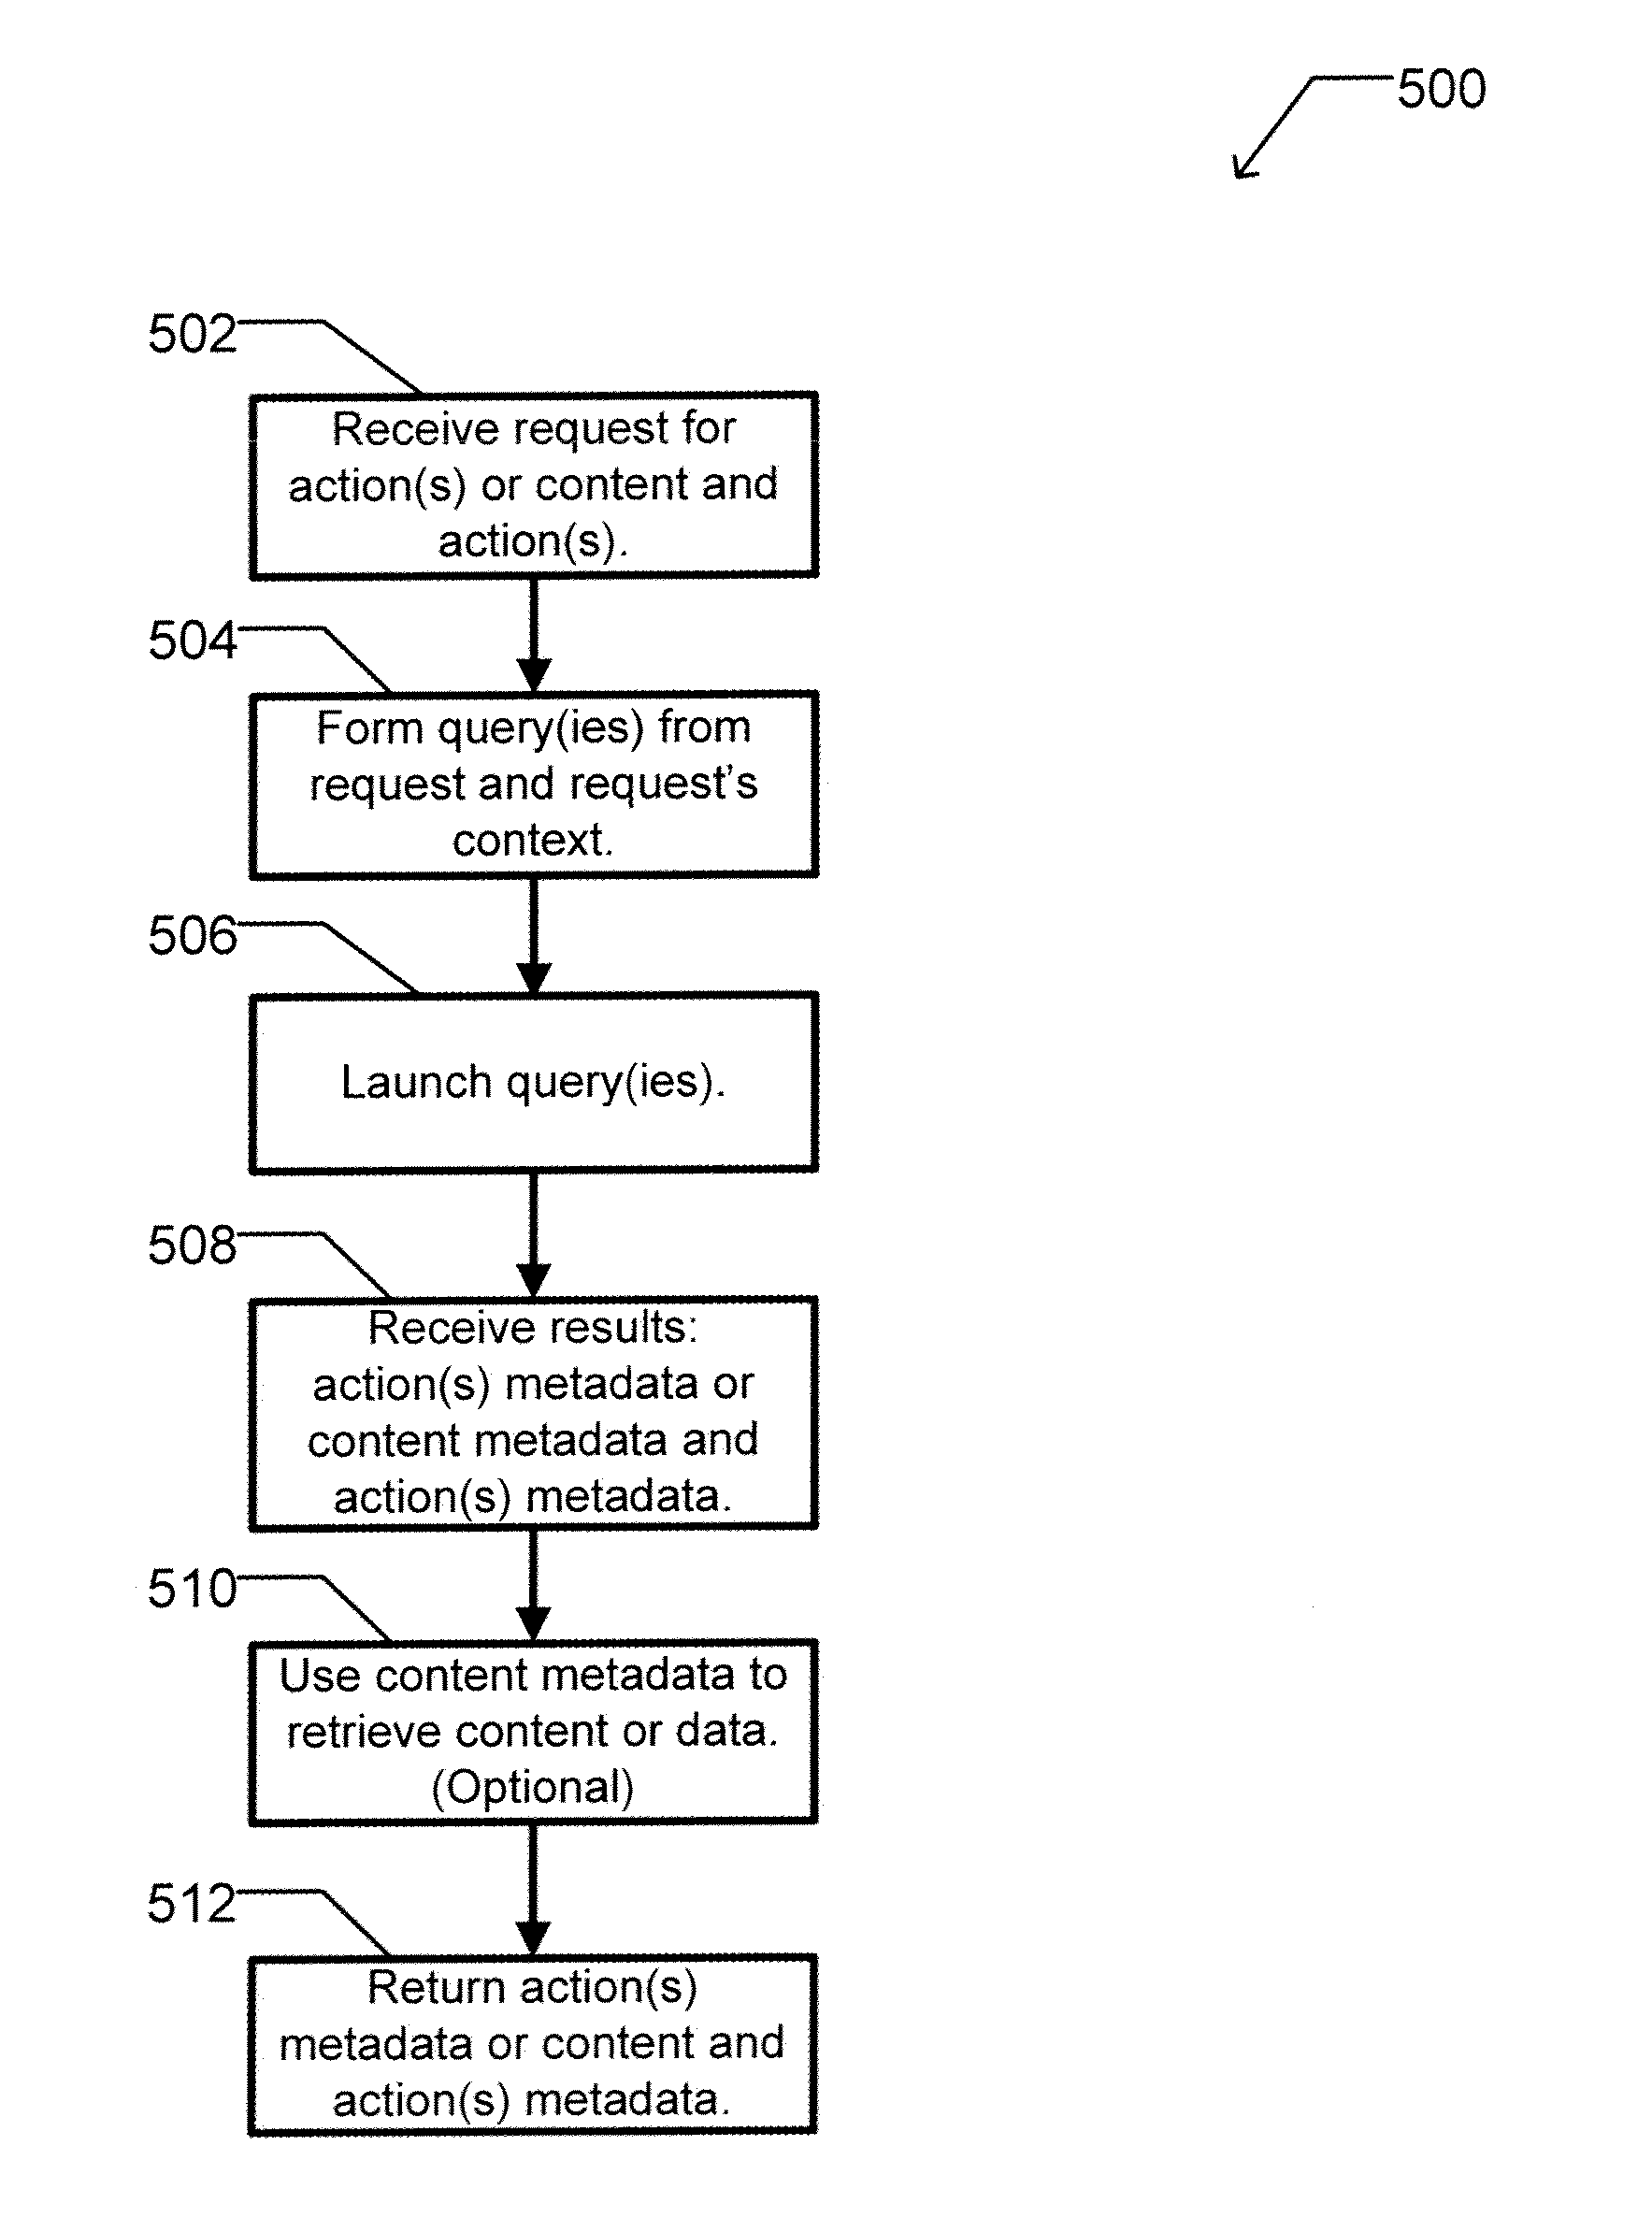 Apparatus and method for dynamically selecting componentized executable instructions at run time